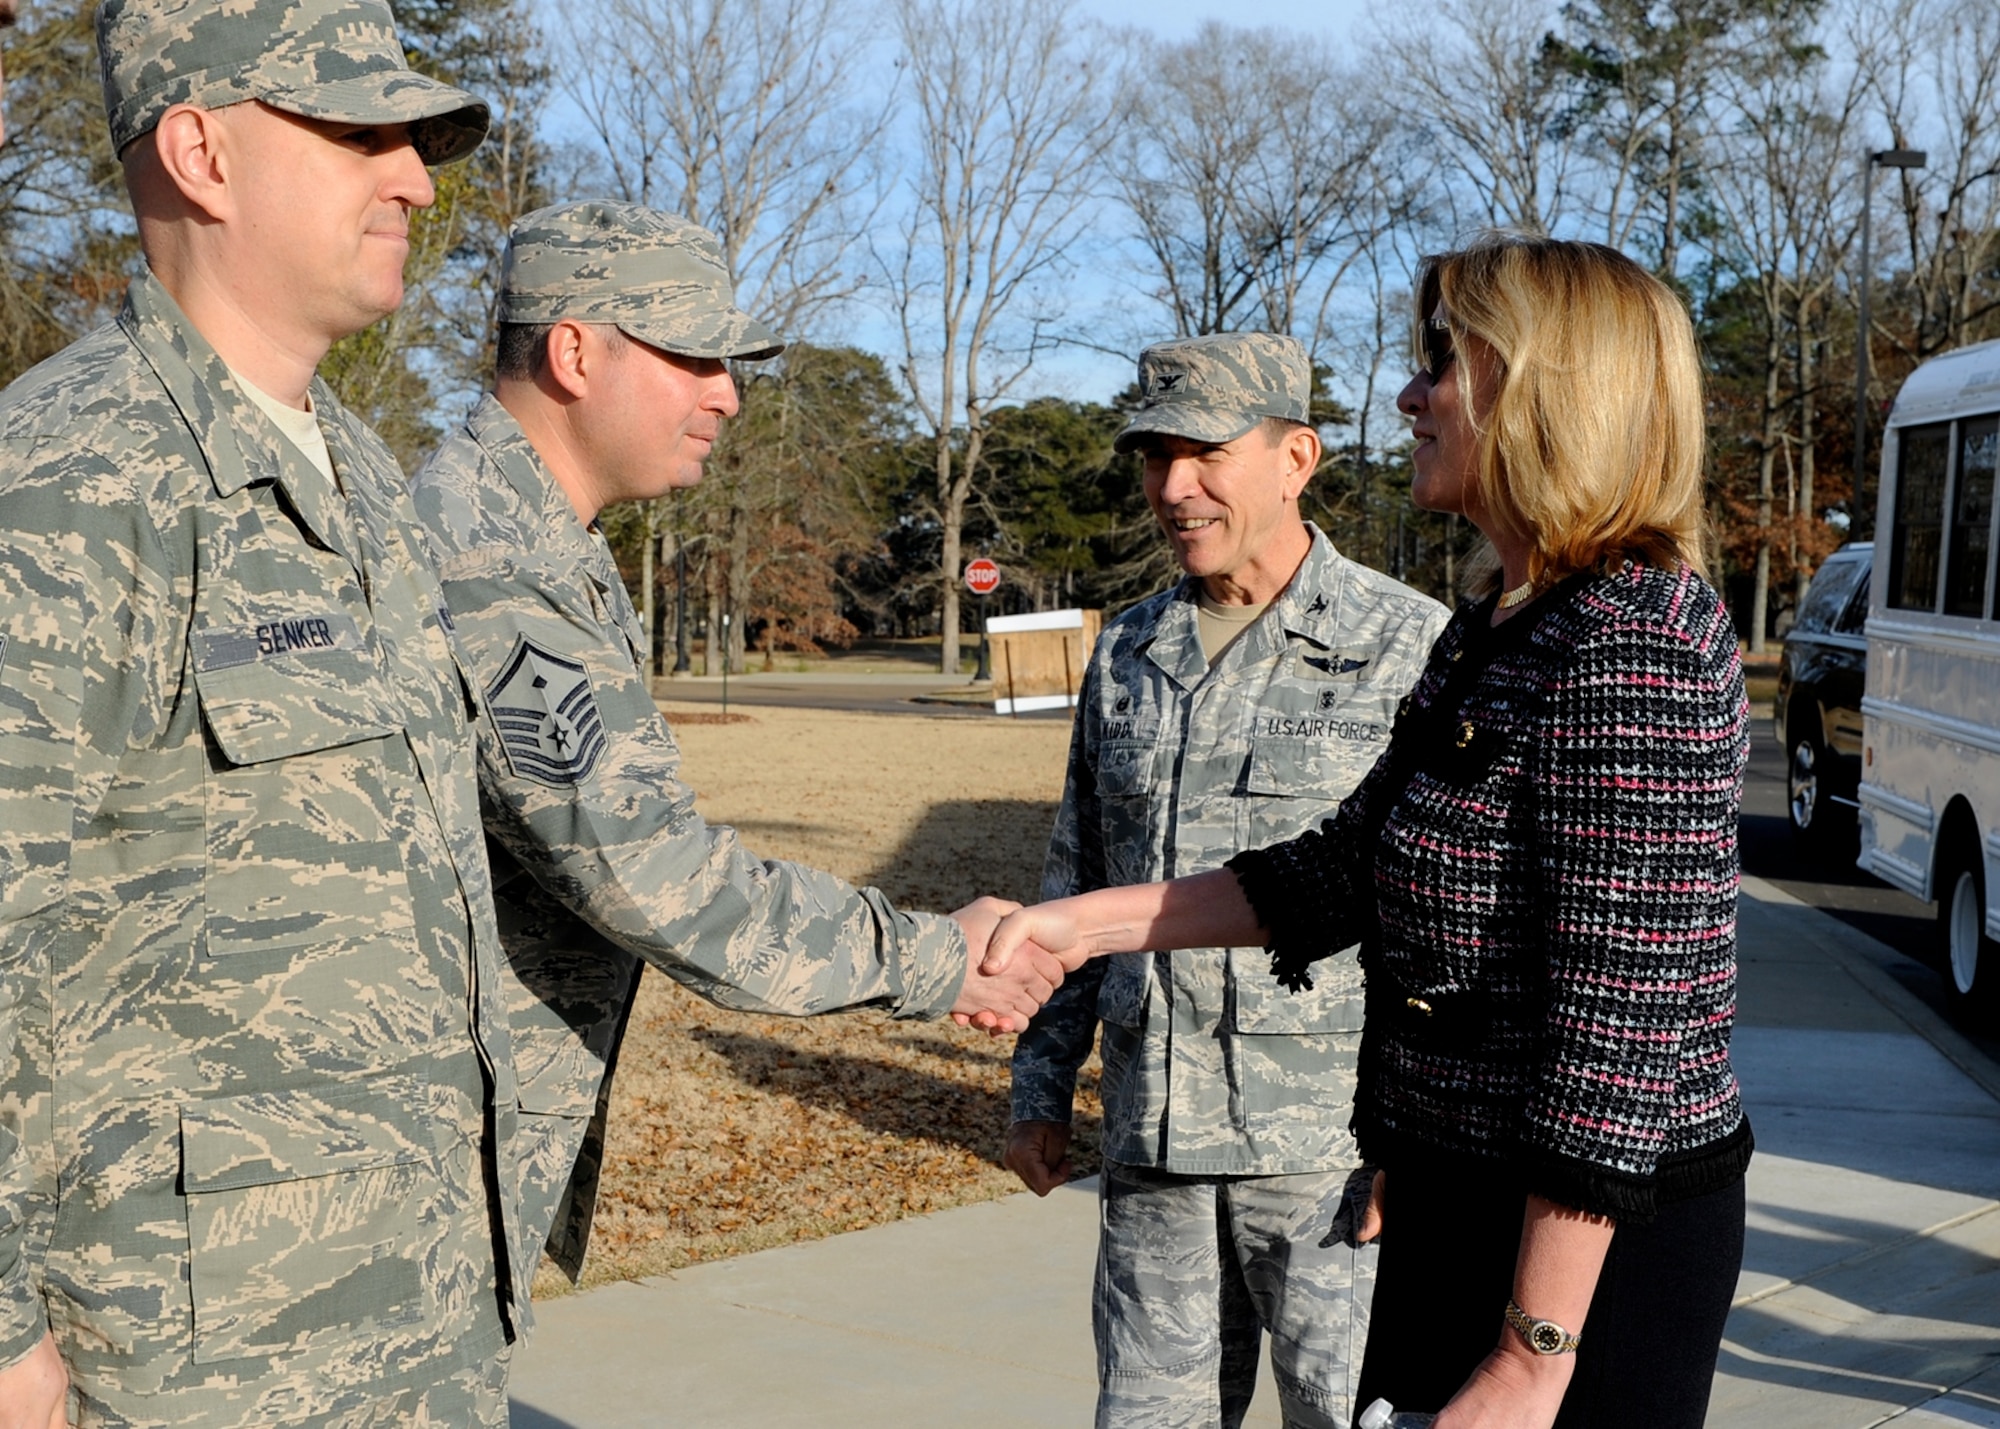 Members of the 14th Medical Group meet Secretary of the Air Force Deborah Lee James outside of the Koritz Clinic Dec. 17, 2014, during her visit to Columbus Air Force Base, Miss. Along with touring some of the base facilities, James sat down with groups of Airmen to answer questions, and learn more about their daily missions. (U.S. Air Force Photo/Elizabeth Owens)